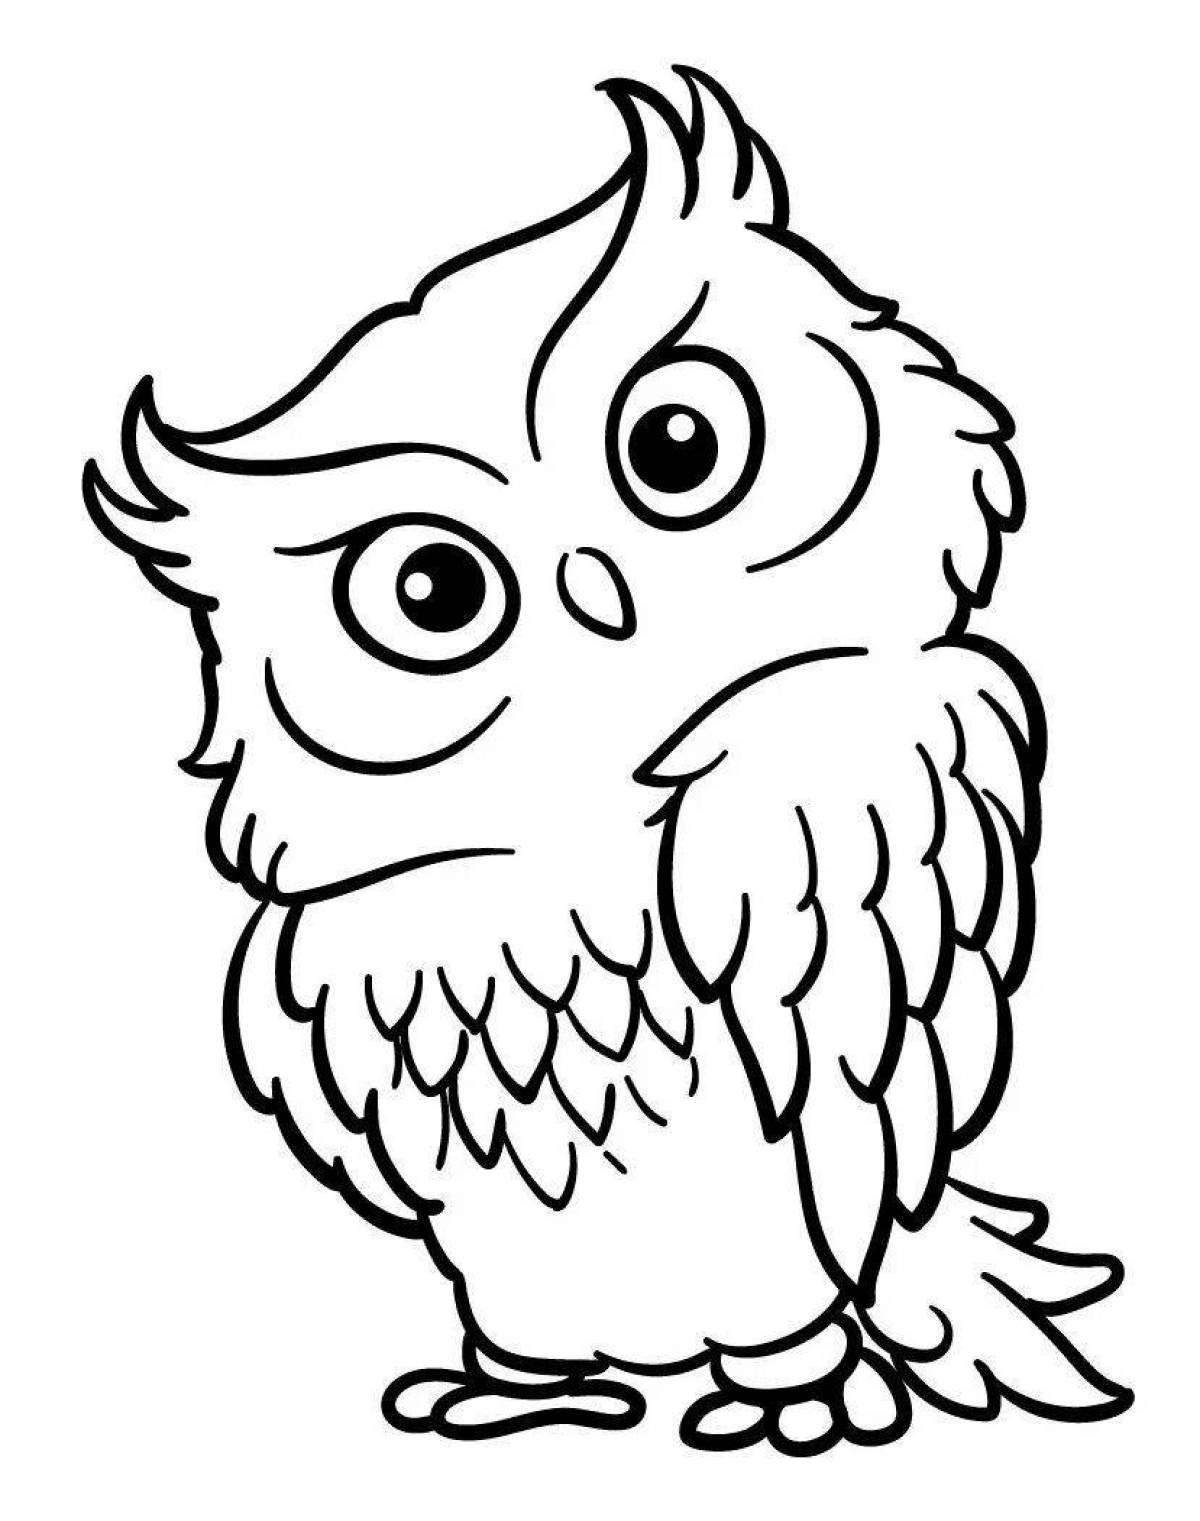 Glowing wise owl coloring book for kids